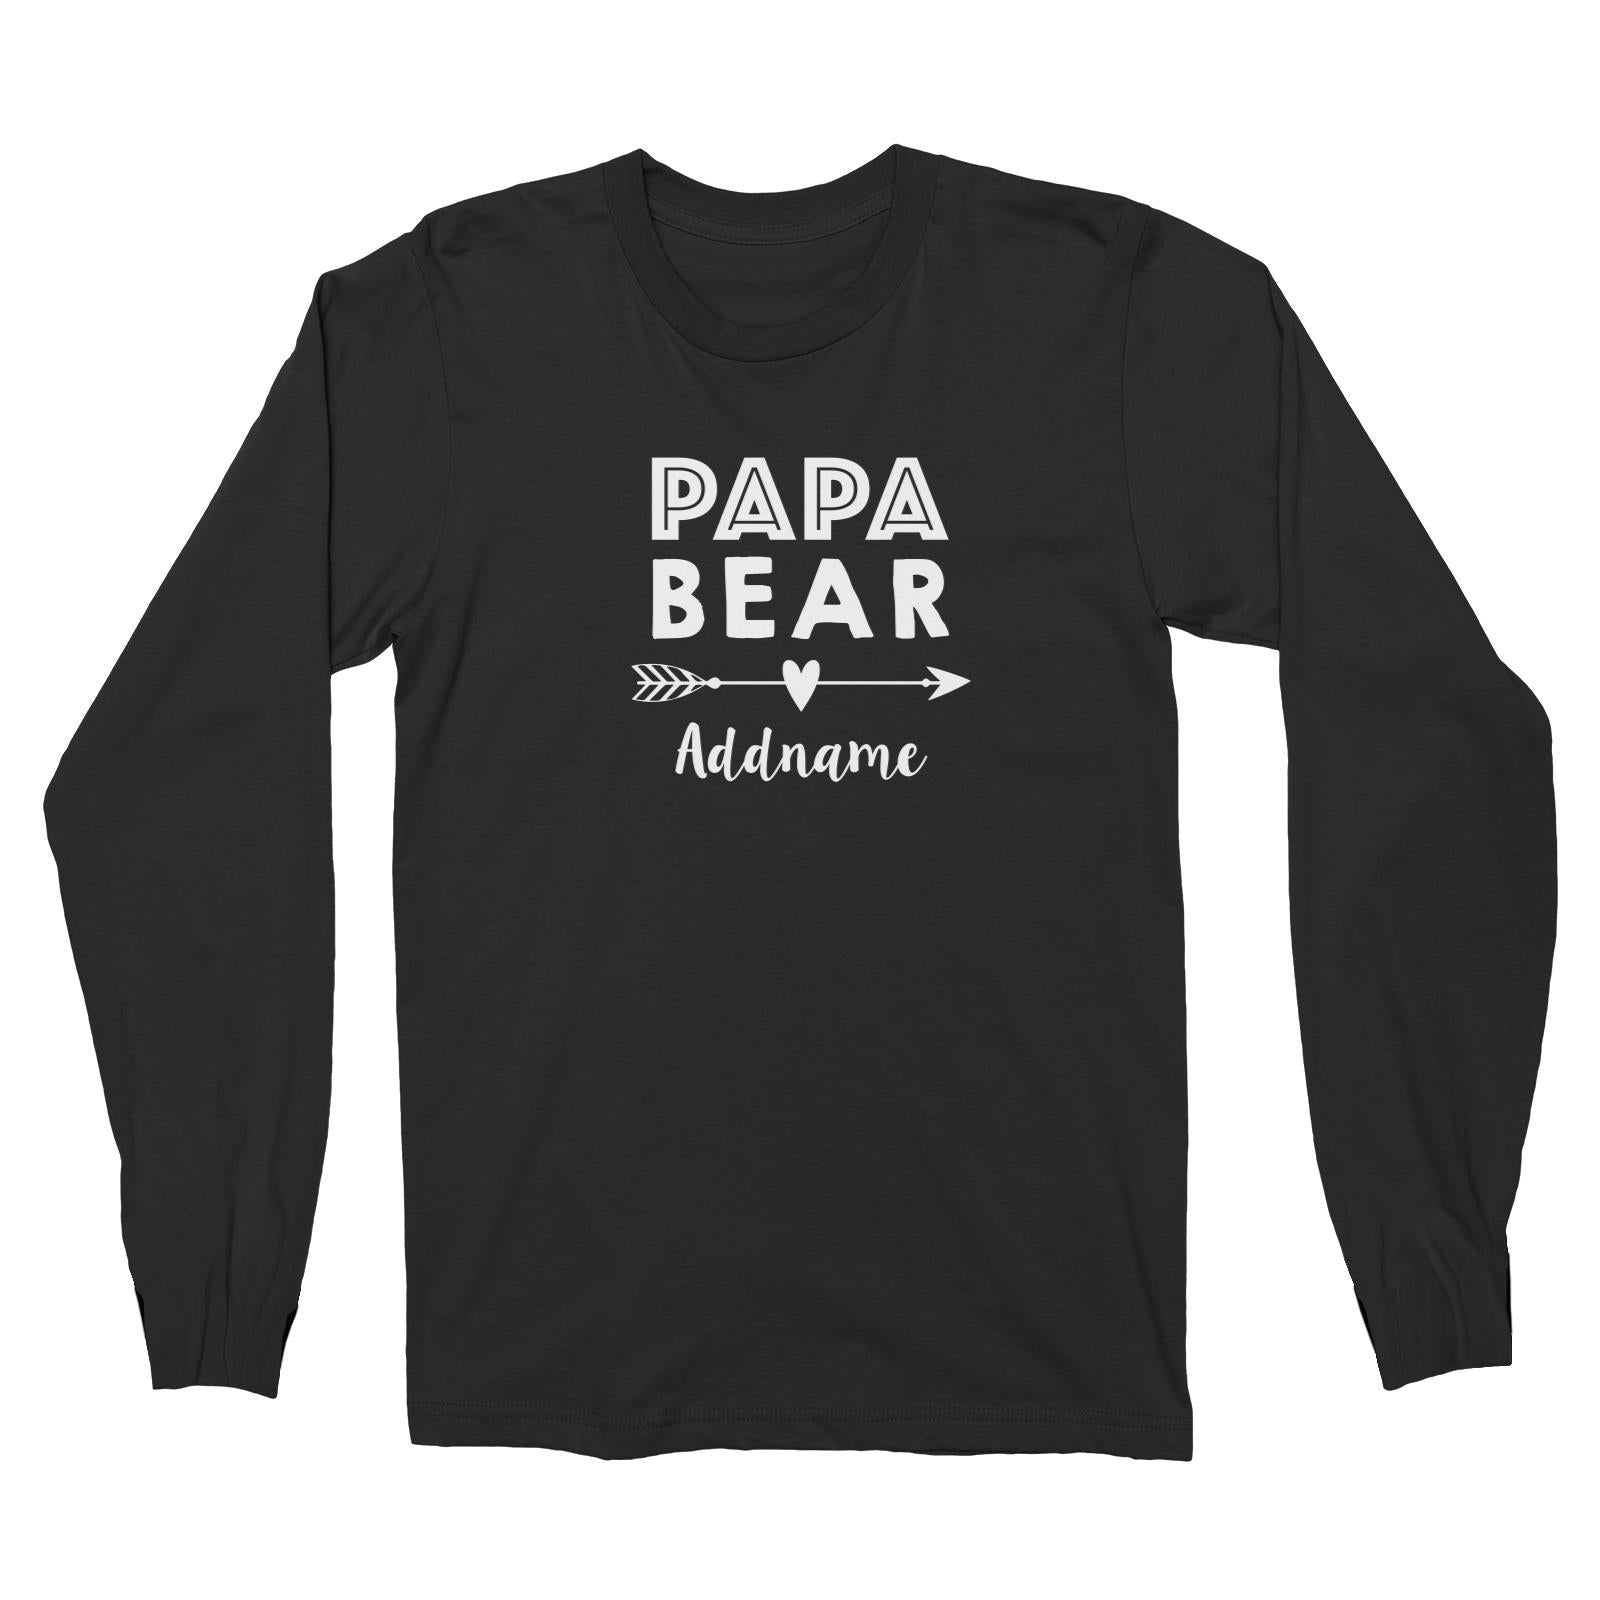 Papa Bear Addname Long Sleeve Unisex T-Shirt  Matching Family Personalizable Designs